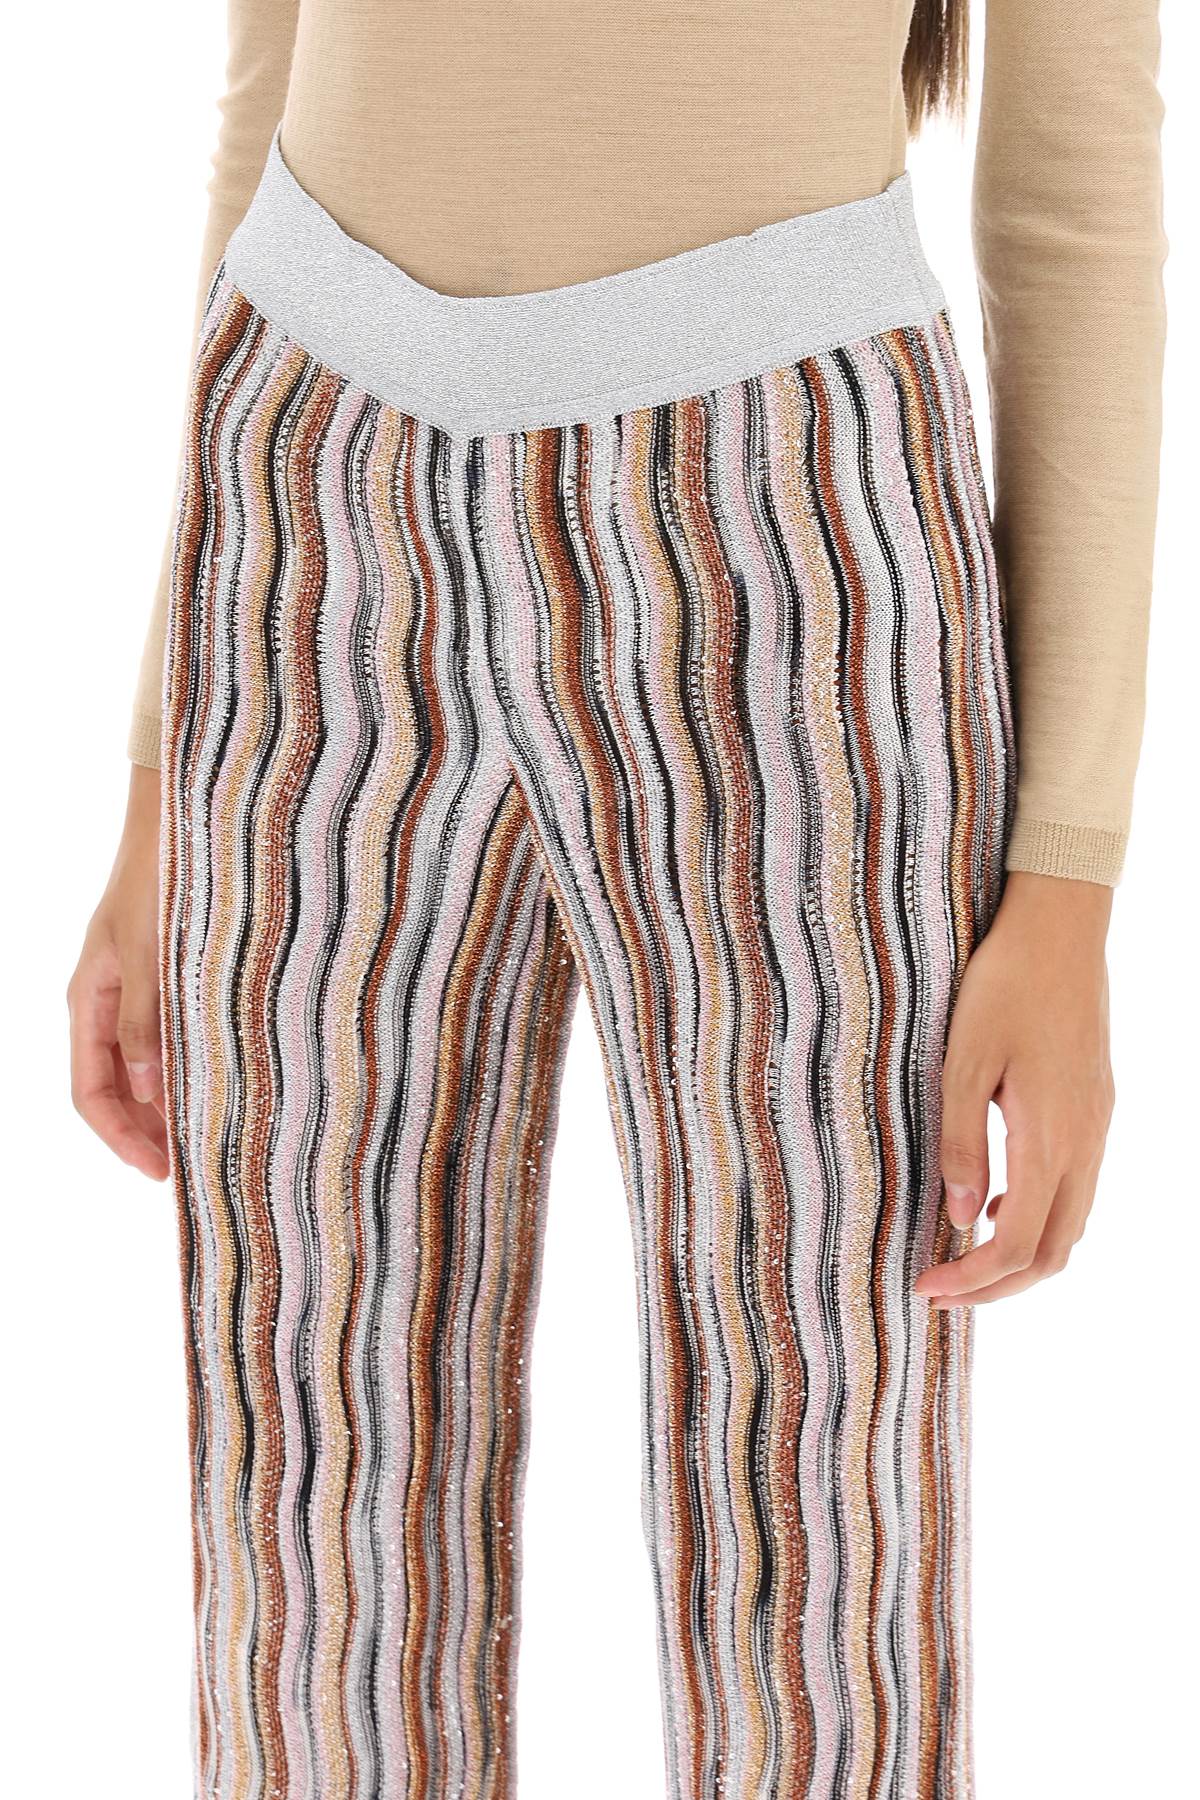 Shop Missoni Sequined Knit Pants With Wavy Motif In Multi Paill Orang Re (metallic)